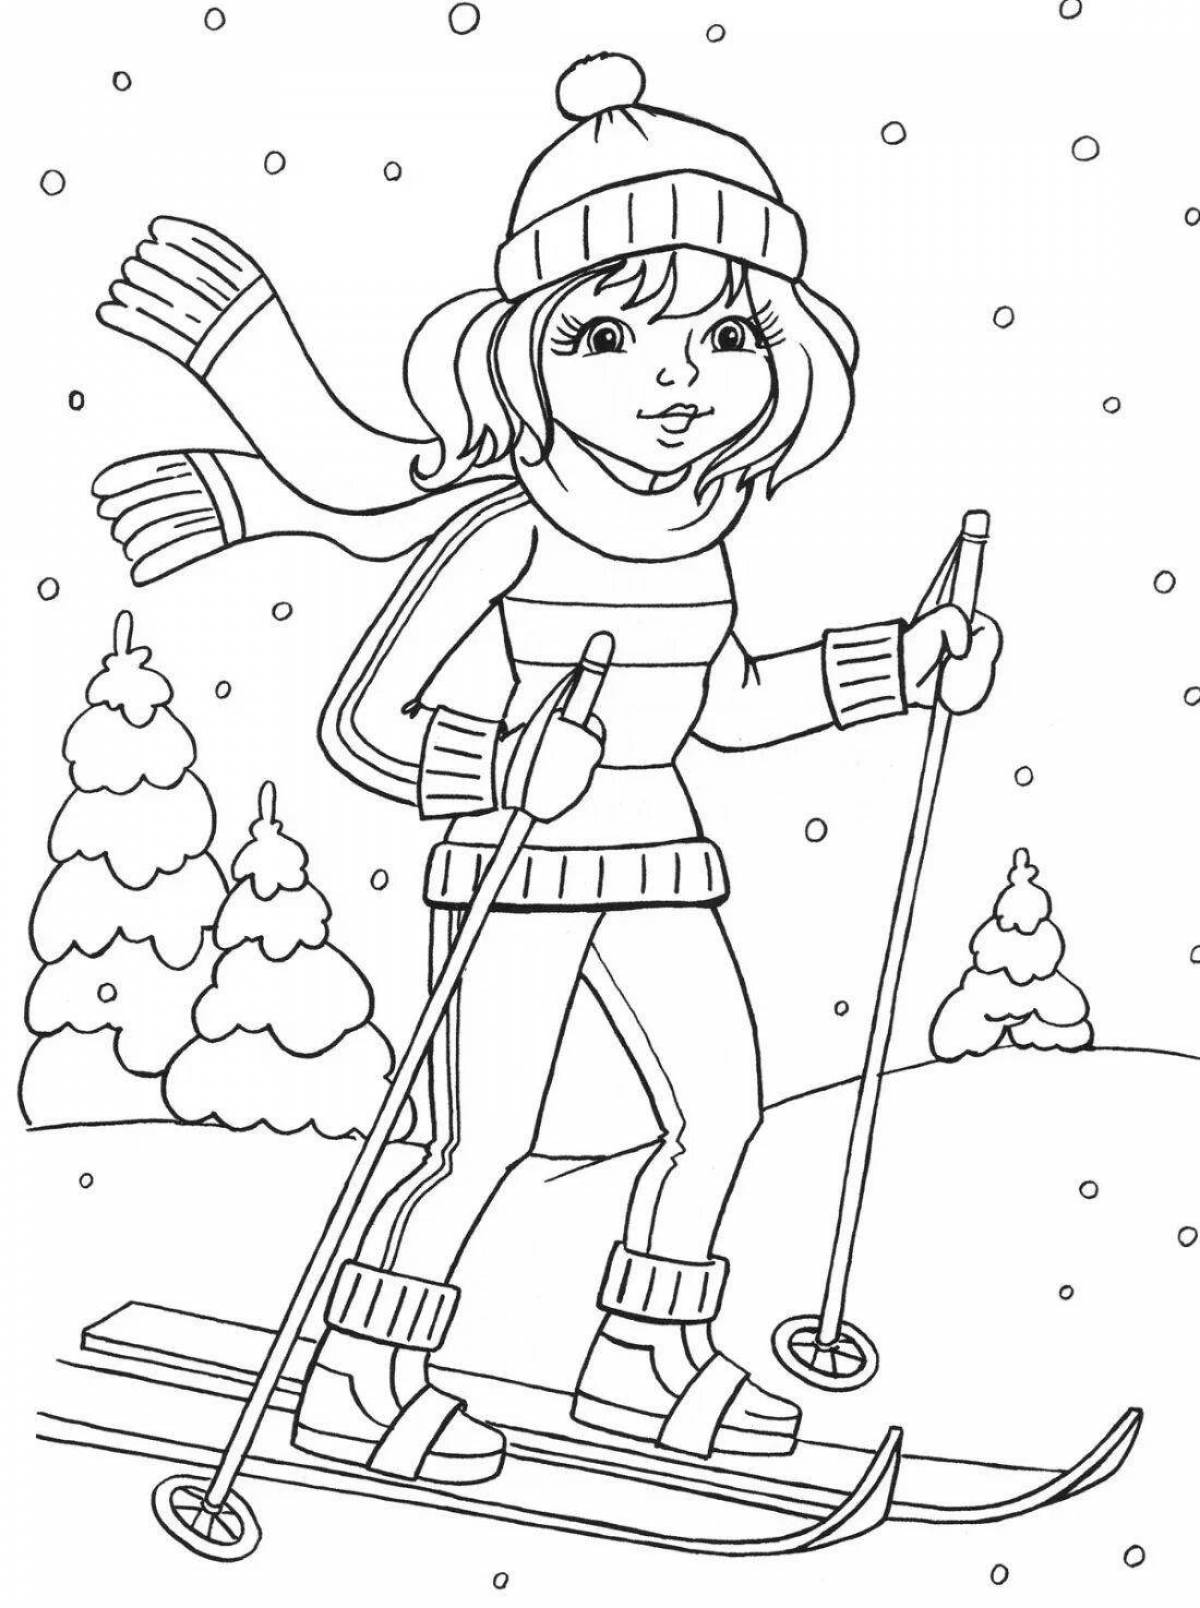 Incredible dhow winter sports coloring book